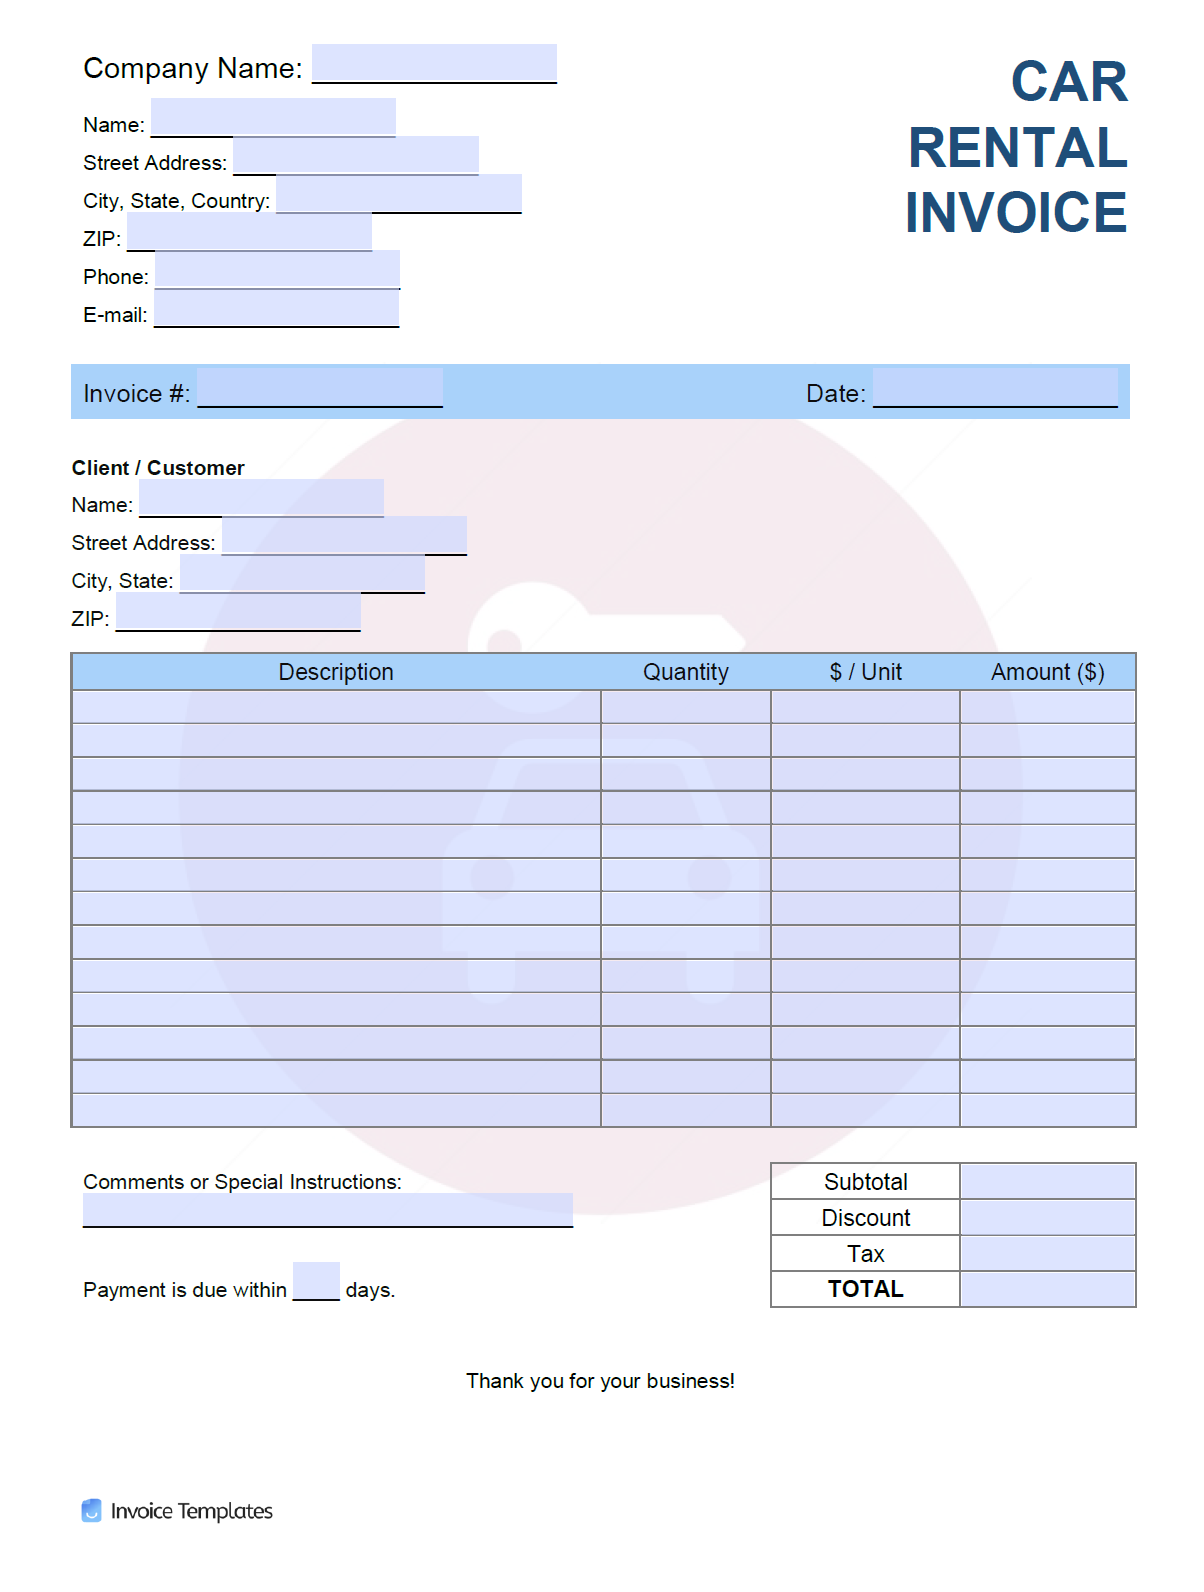 Free Car Rental Invoice Template  PDF  WORD  EXCEL In Car Sales Invoice Template Uk